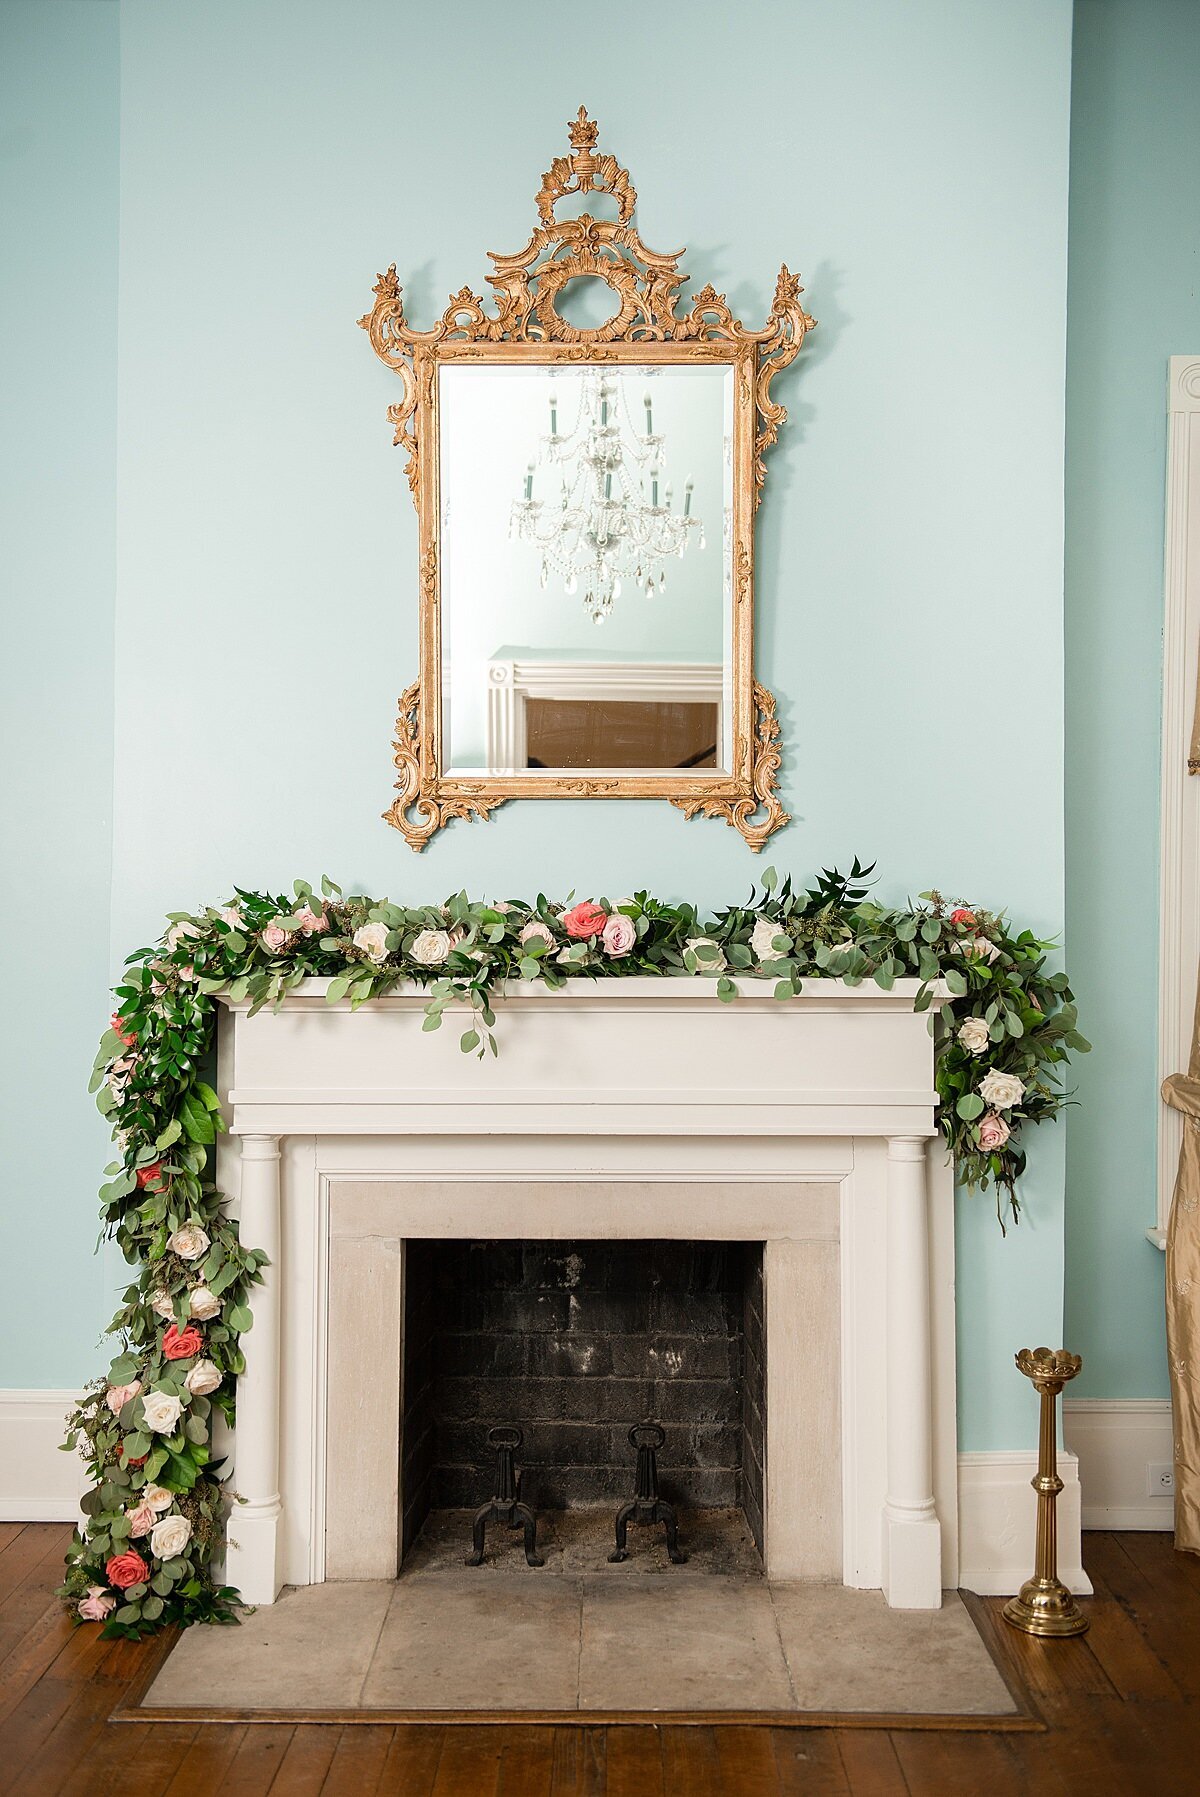 The large gilded gold mirror hangs above an ivory wood and marble mantle in the blue front room at Ravenswood Mansion. The crystal chandelier is reflected in the gold mirror, The mantle is decorated with a lush garland of greenery, accented by peach, blush, white and ivory rises and flowers.